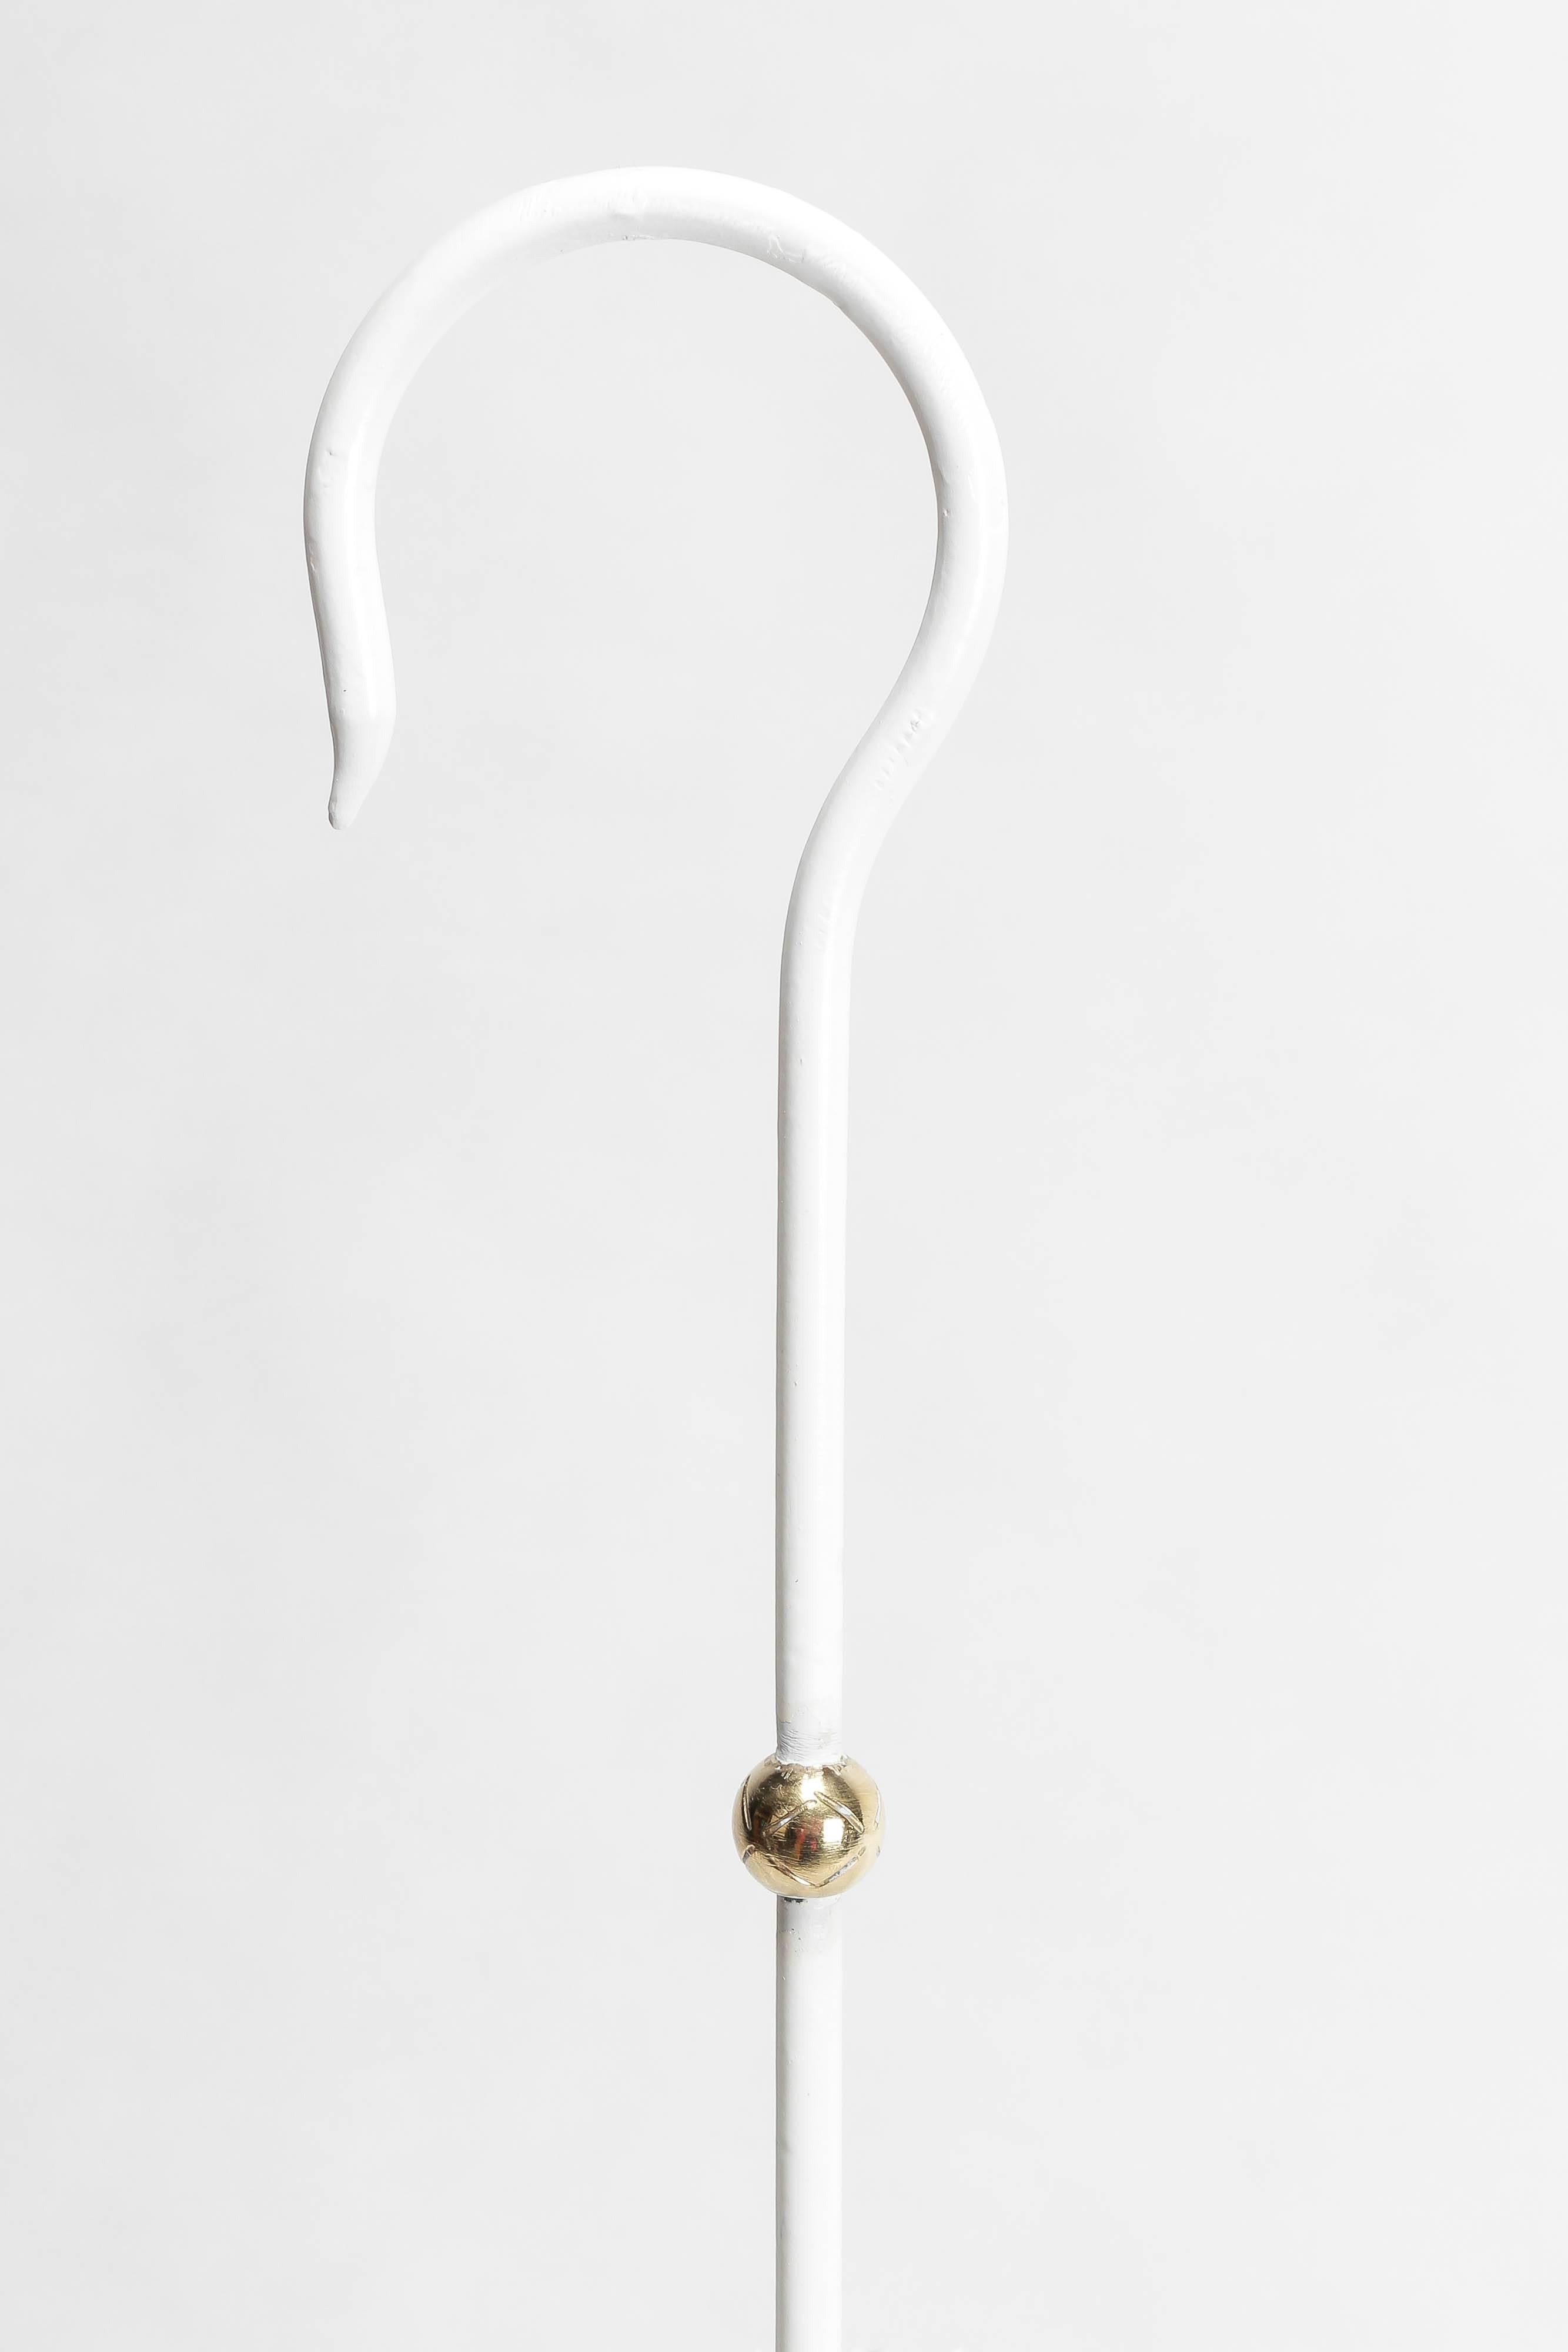 Mathieu Matégot Style Umbrella Stand White Metal and Brass, 1950s For Sale 1